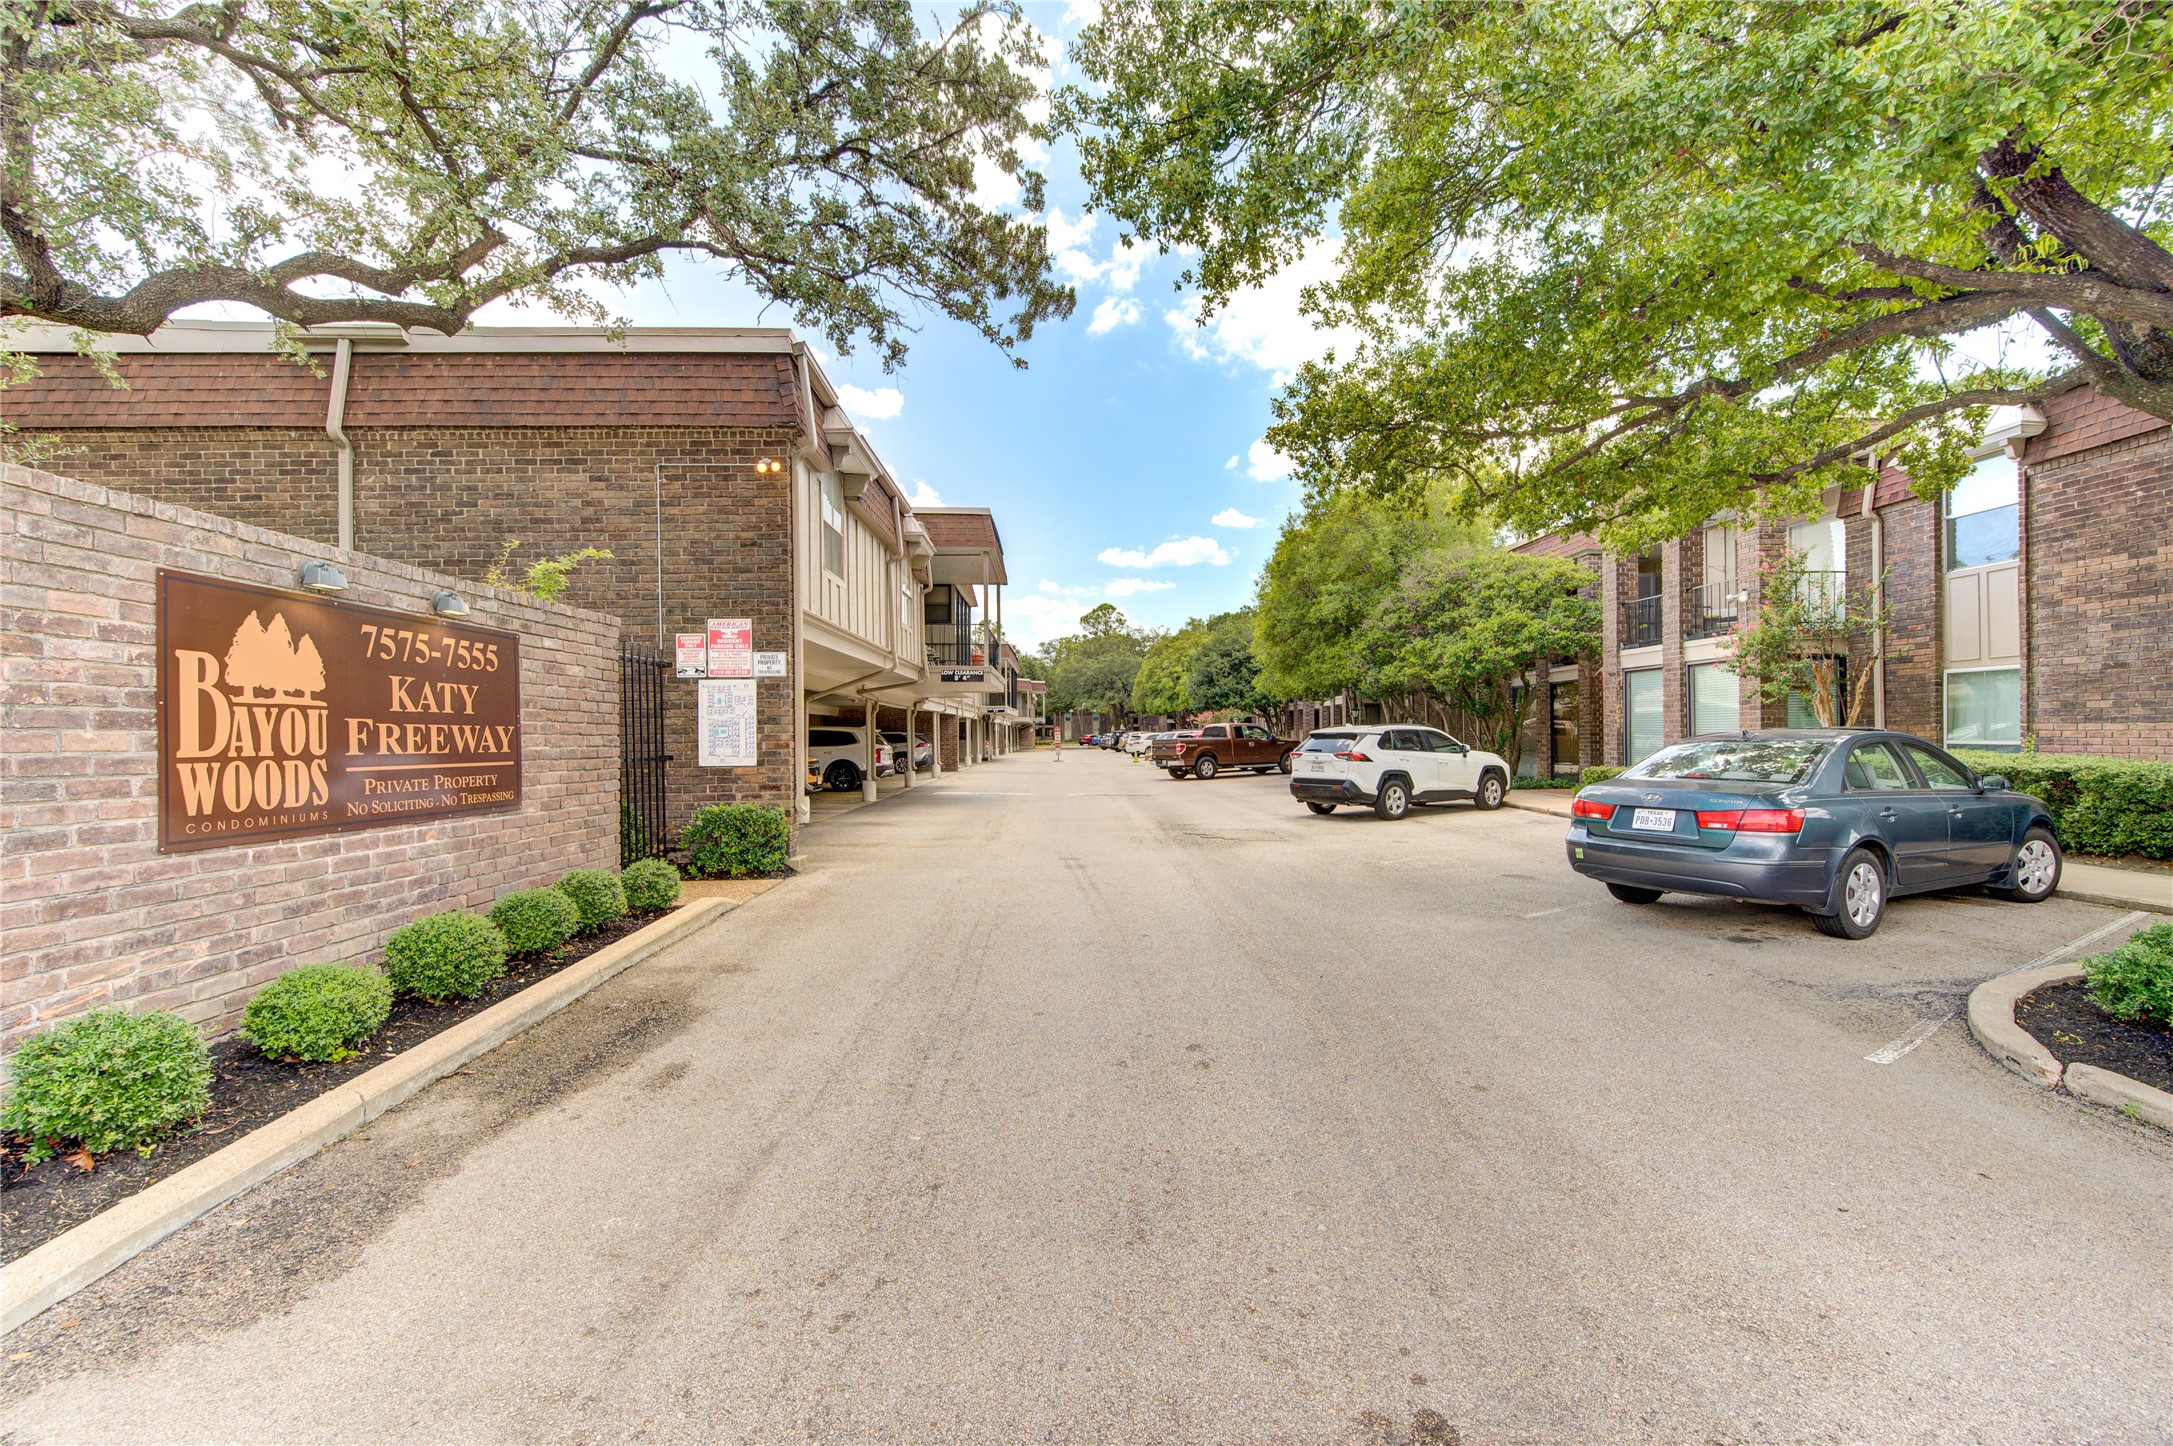 Bayou Woods--Conveniently located on the service road right off I-10, between Silber & N Post Oak Lane with a 24/7 guarded entrance and amenities galore! Schedule your showing today! What are you waiting for?